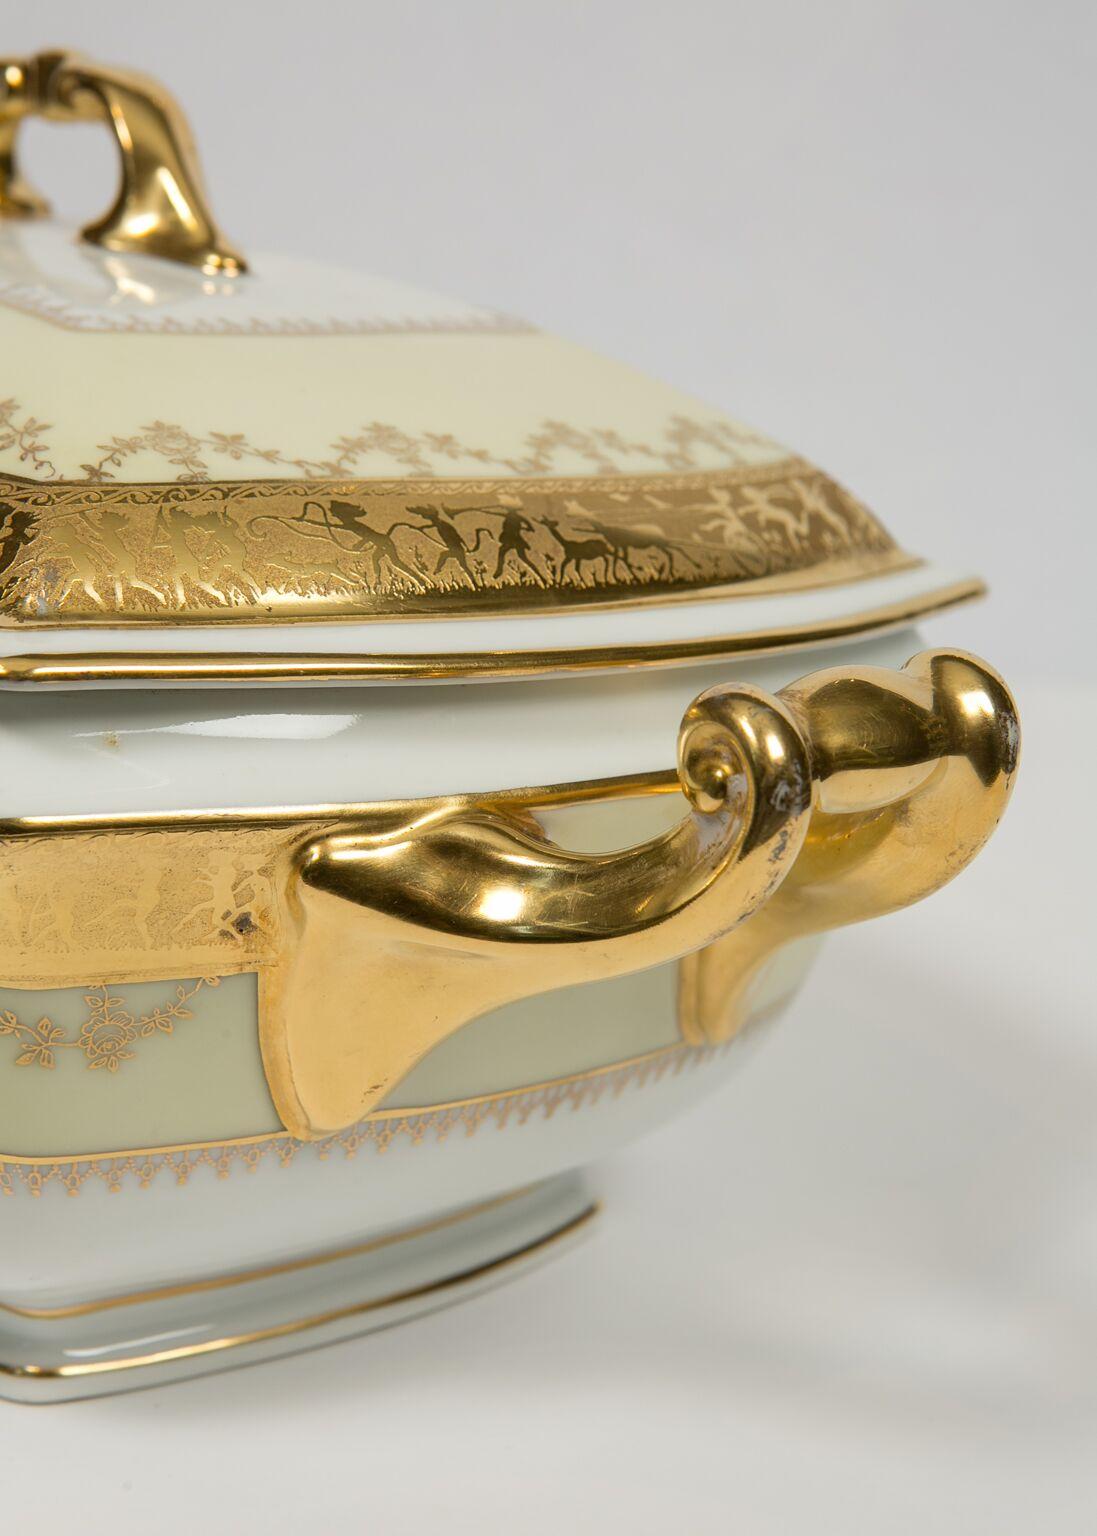 Neoclassical Porcelain Gilded Tureen Made Mid-20th Century For Sale 3